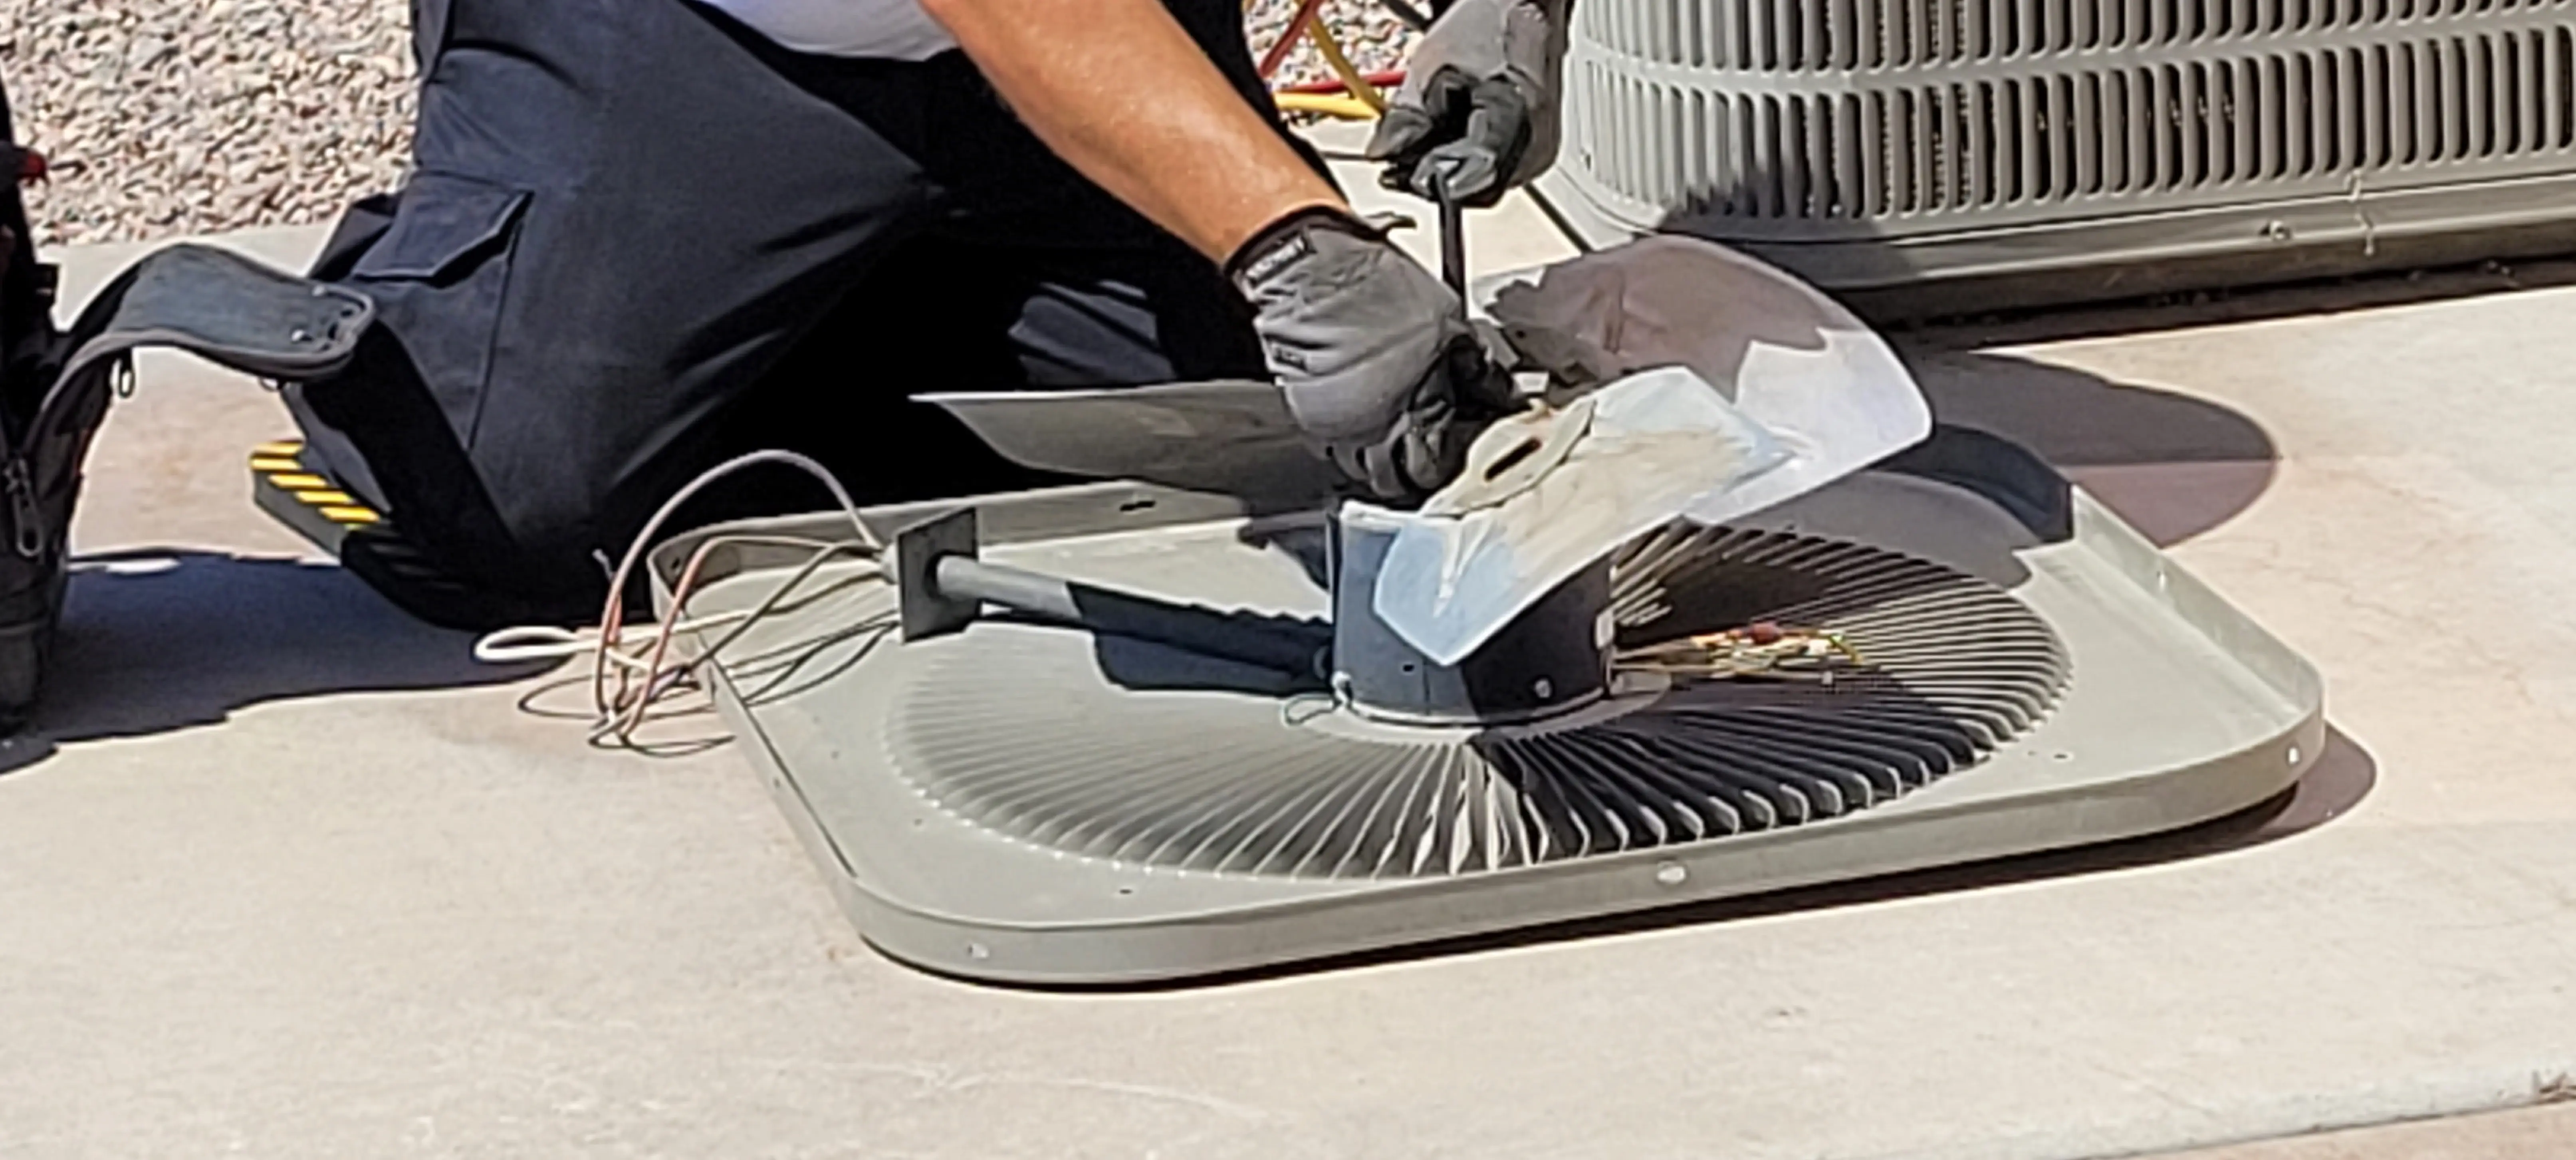 Air-Conditioning-Repair--in-Liberty-Hill-Texas-Air-Conditioning-Repair-4296816-image